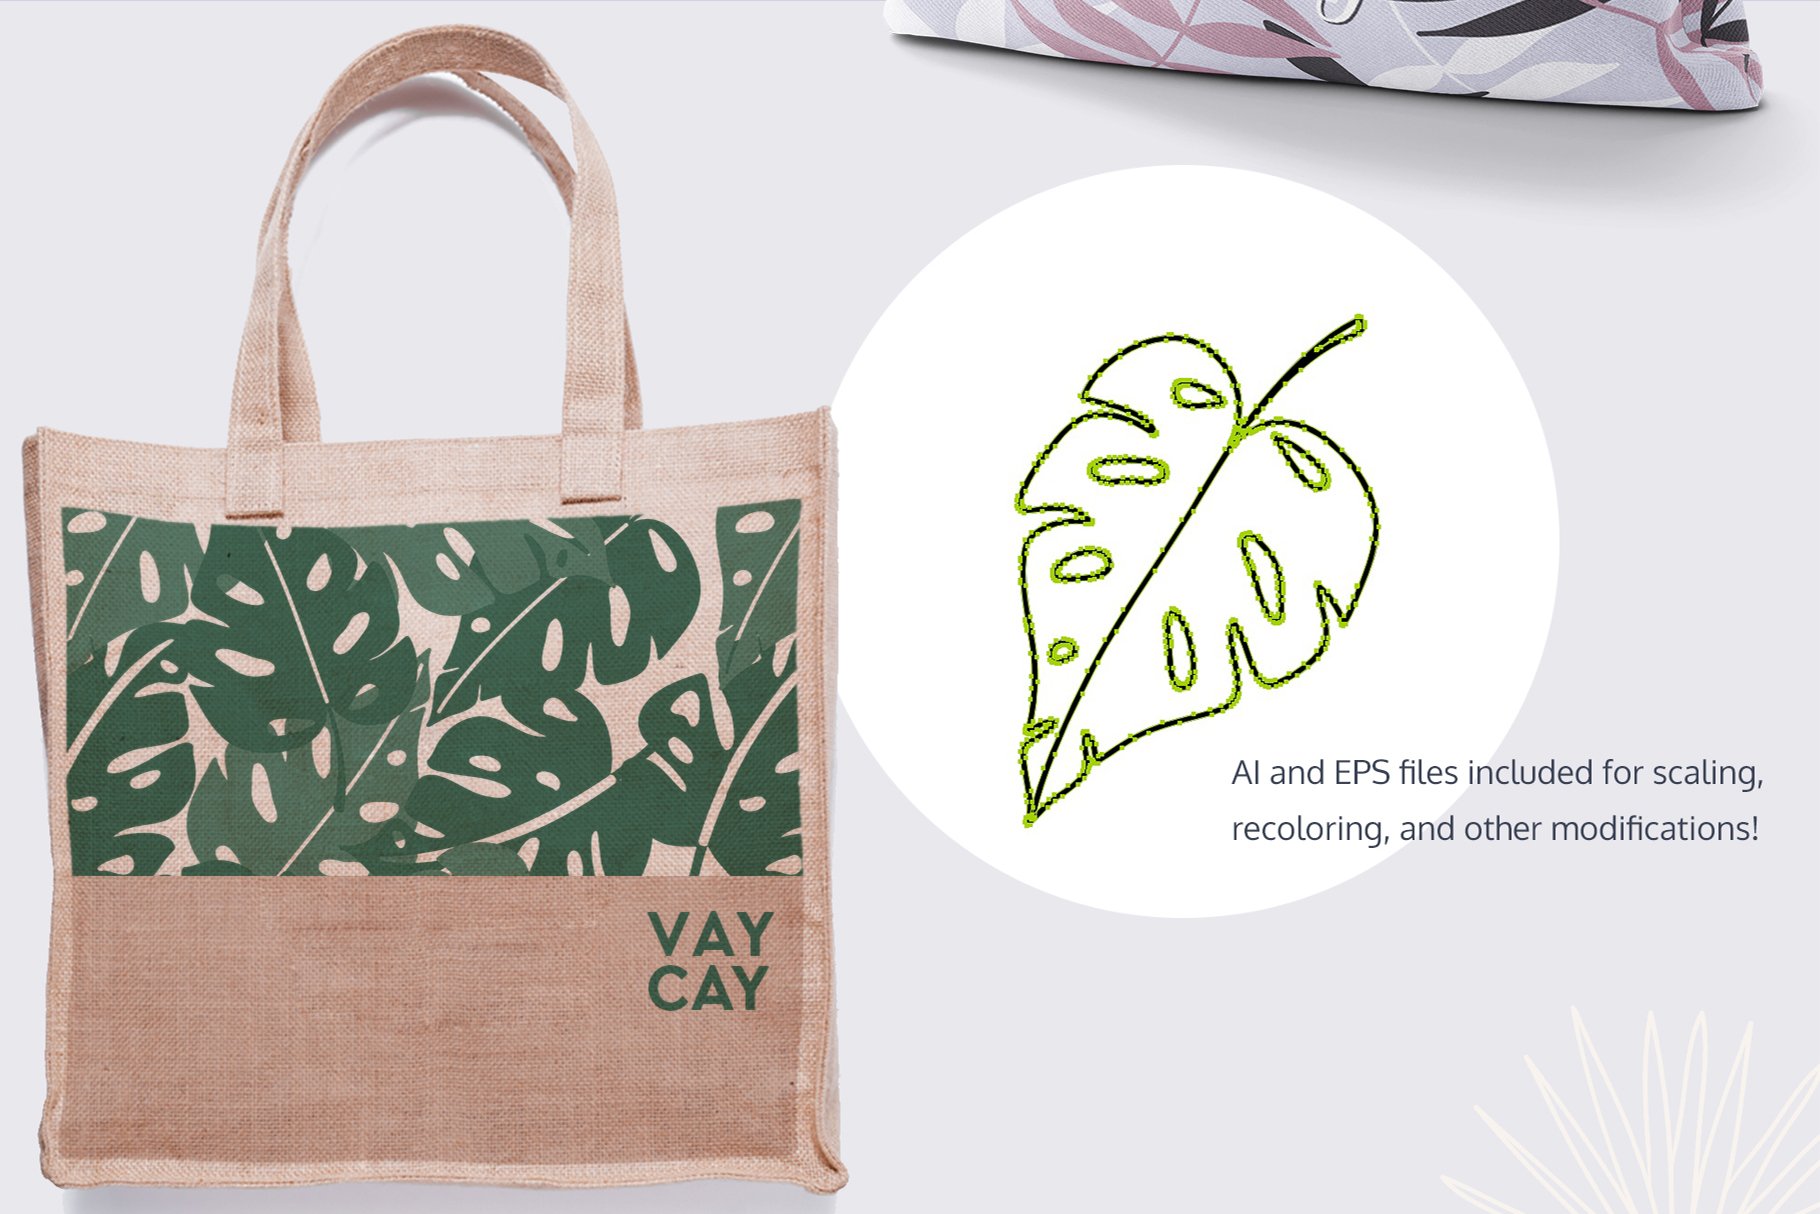 Tote bag with a leaf design on it.